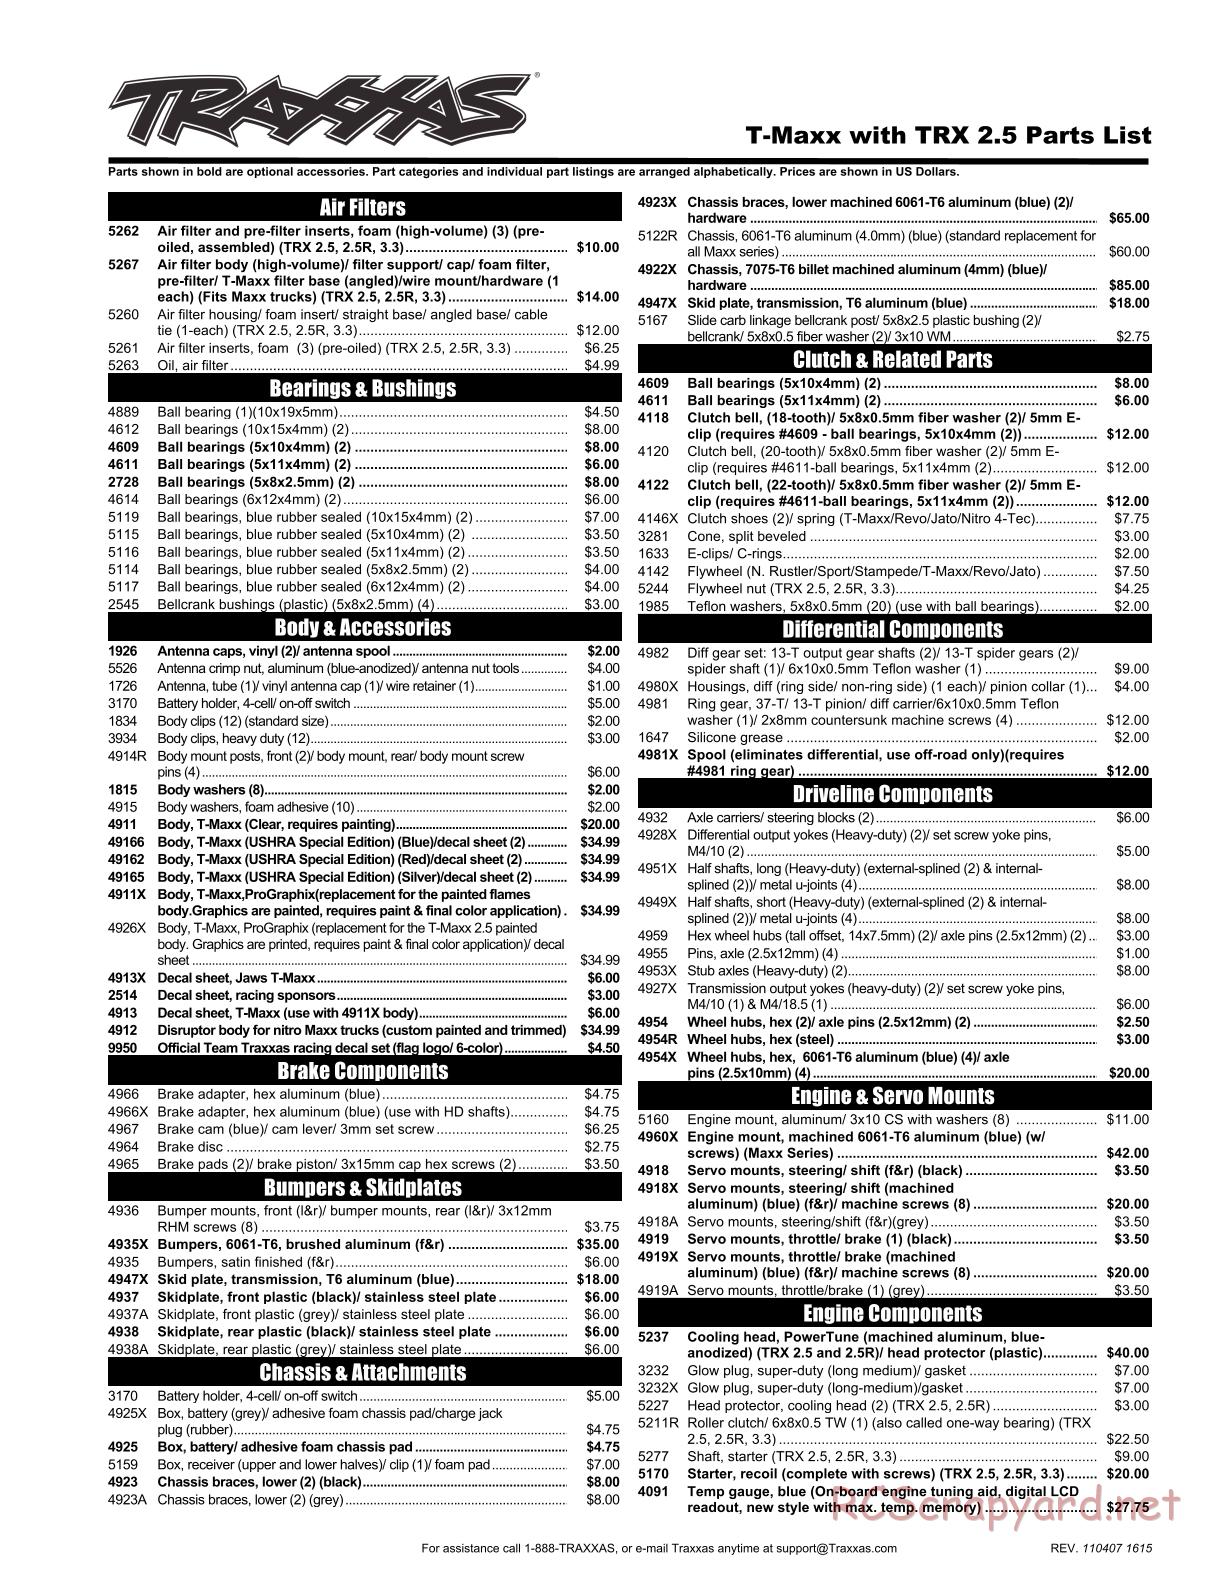 Traxxas - T-Maxx Classic (2008) - Parts List - Page 1